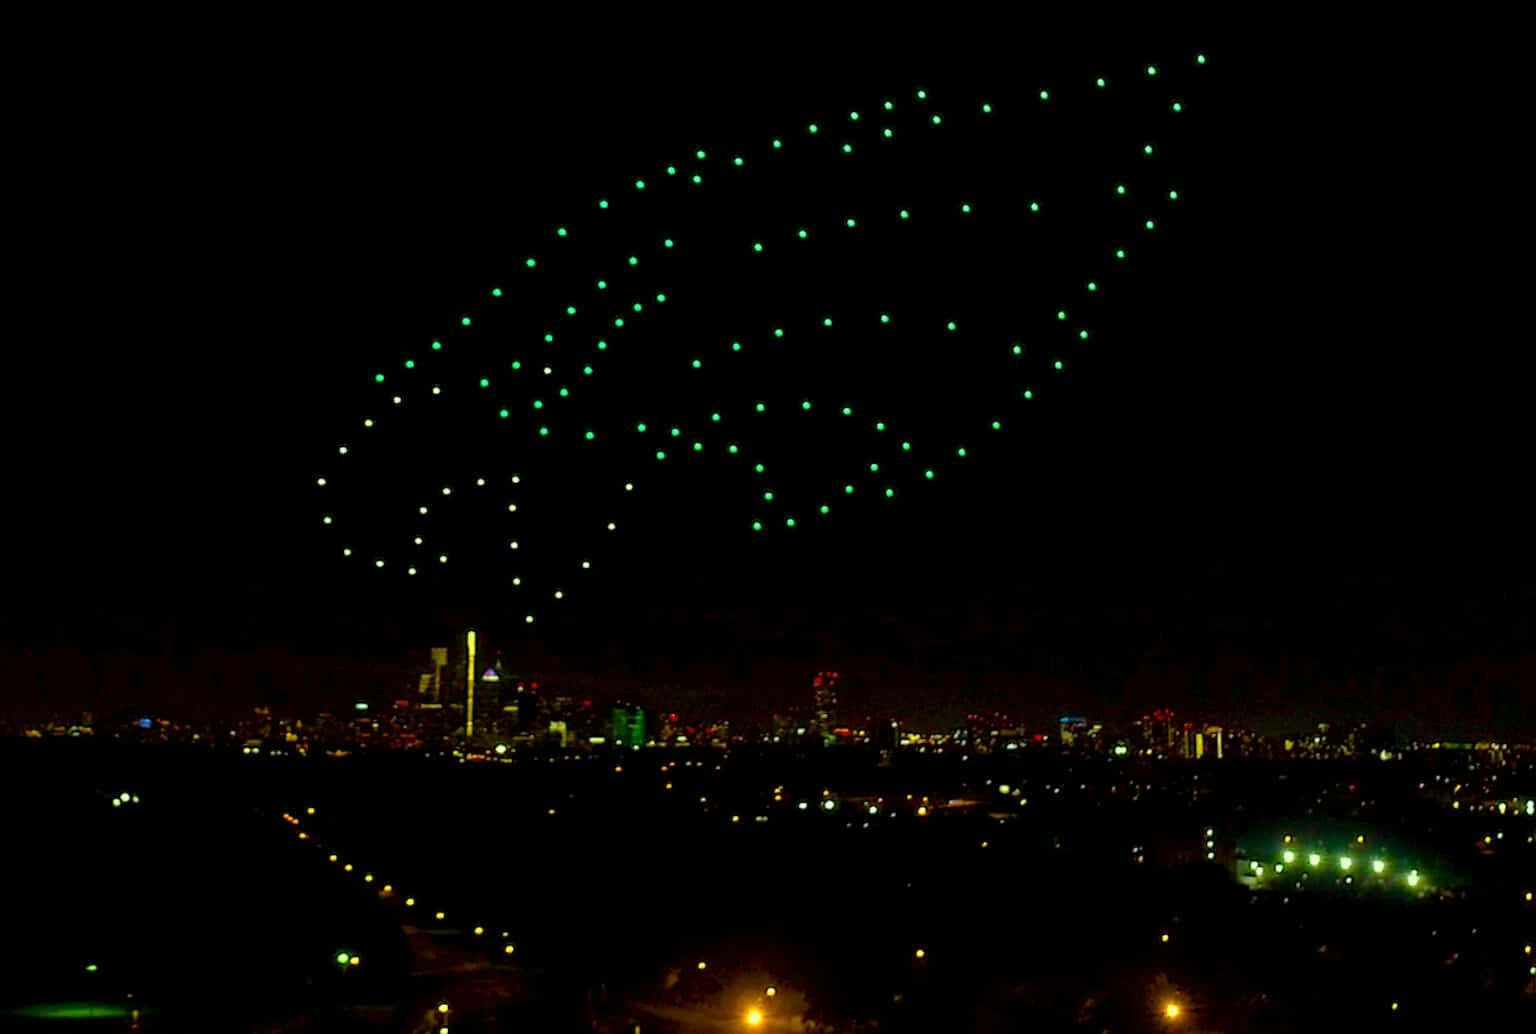 Verge Aero flyes a drone show for the Philadelphia Eagles for the start of the 2020 season.